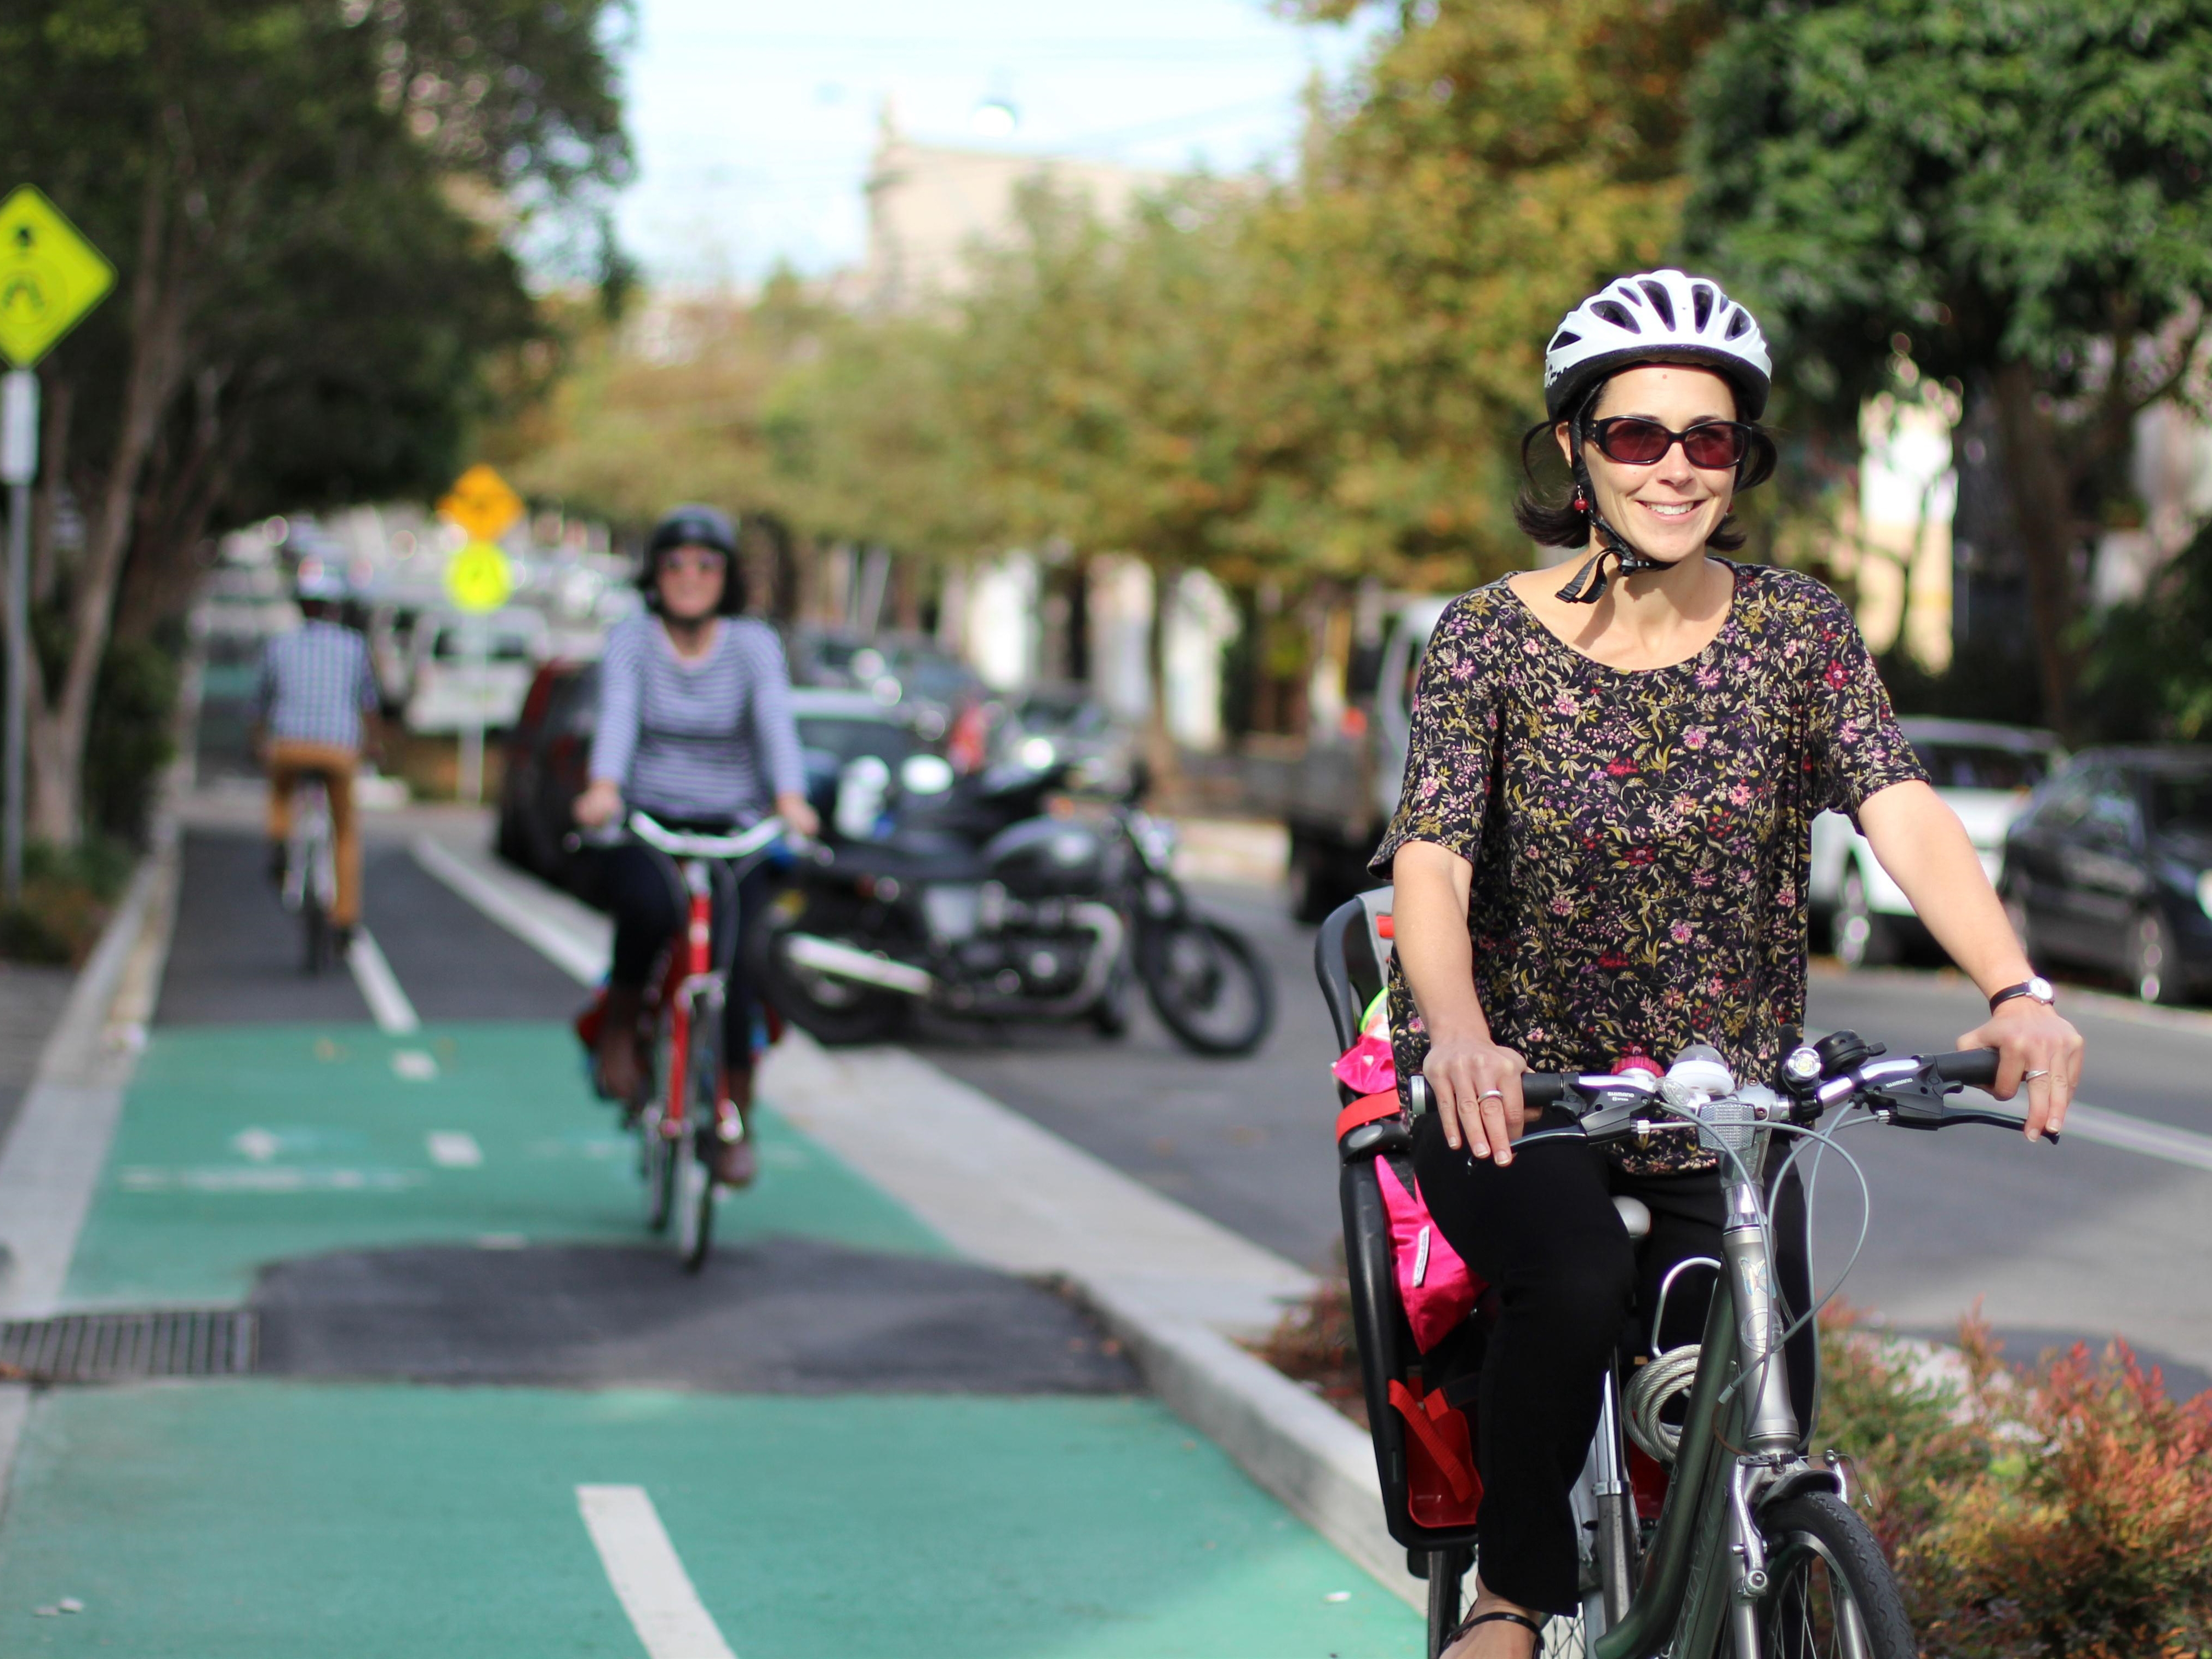 According a new survey, 72 percent of Sydneysiders support separated cycleways and most want Sydney&rsquo;s bike network built much faster. Image:www.cycletraveller.com.au
